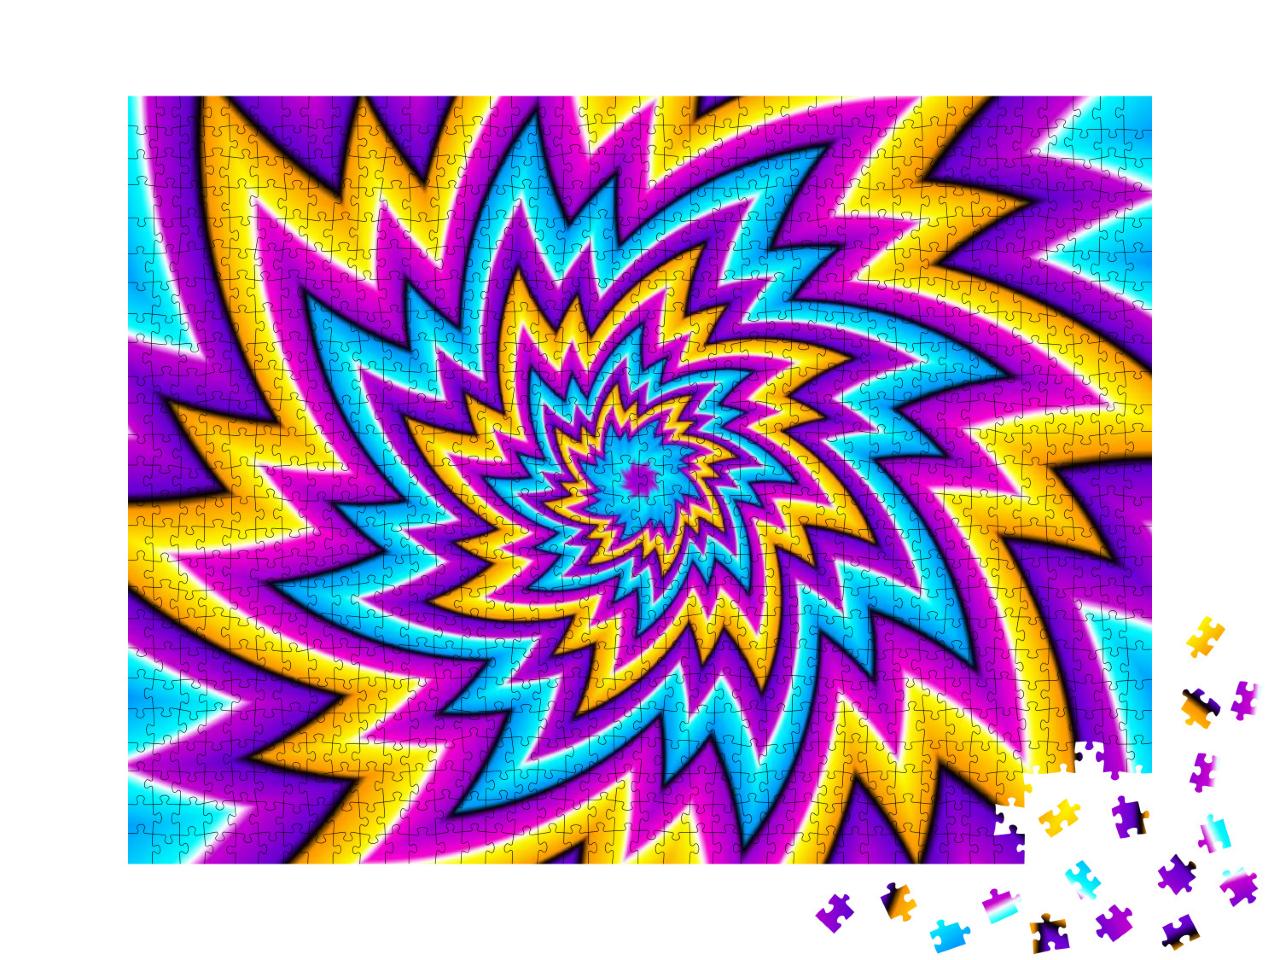 Multicolored Flower Optical Expansion Illusion... Jigsaw Puzzle with 1000 pieces